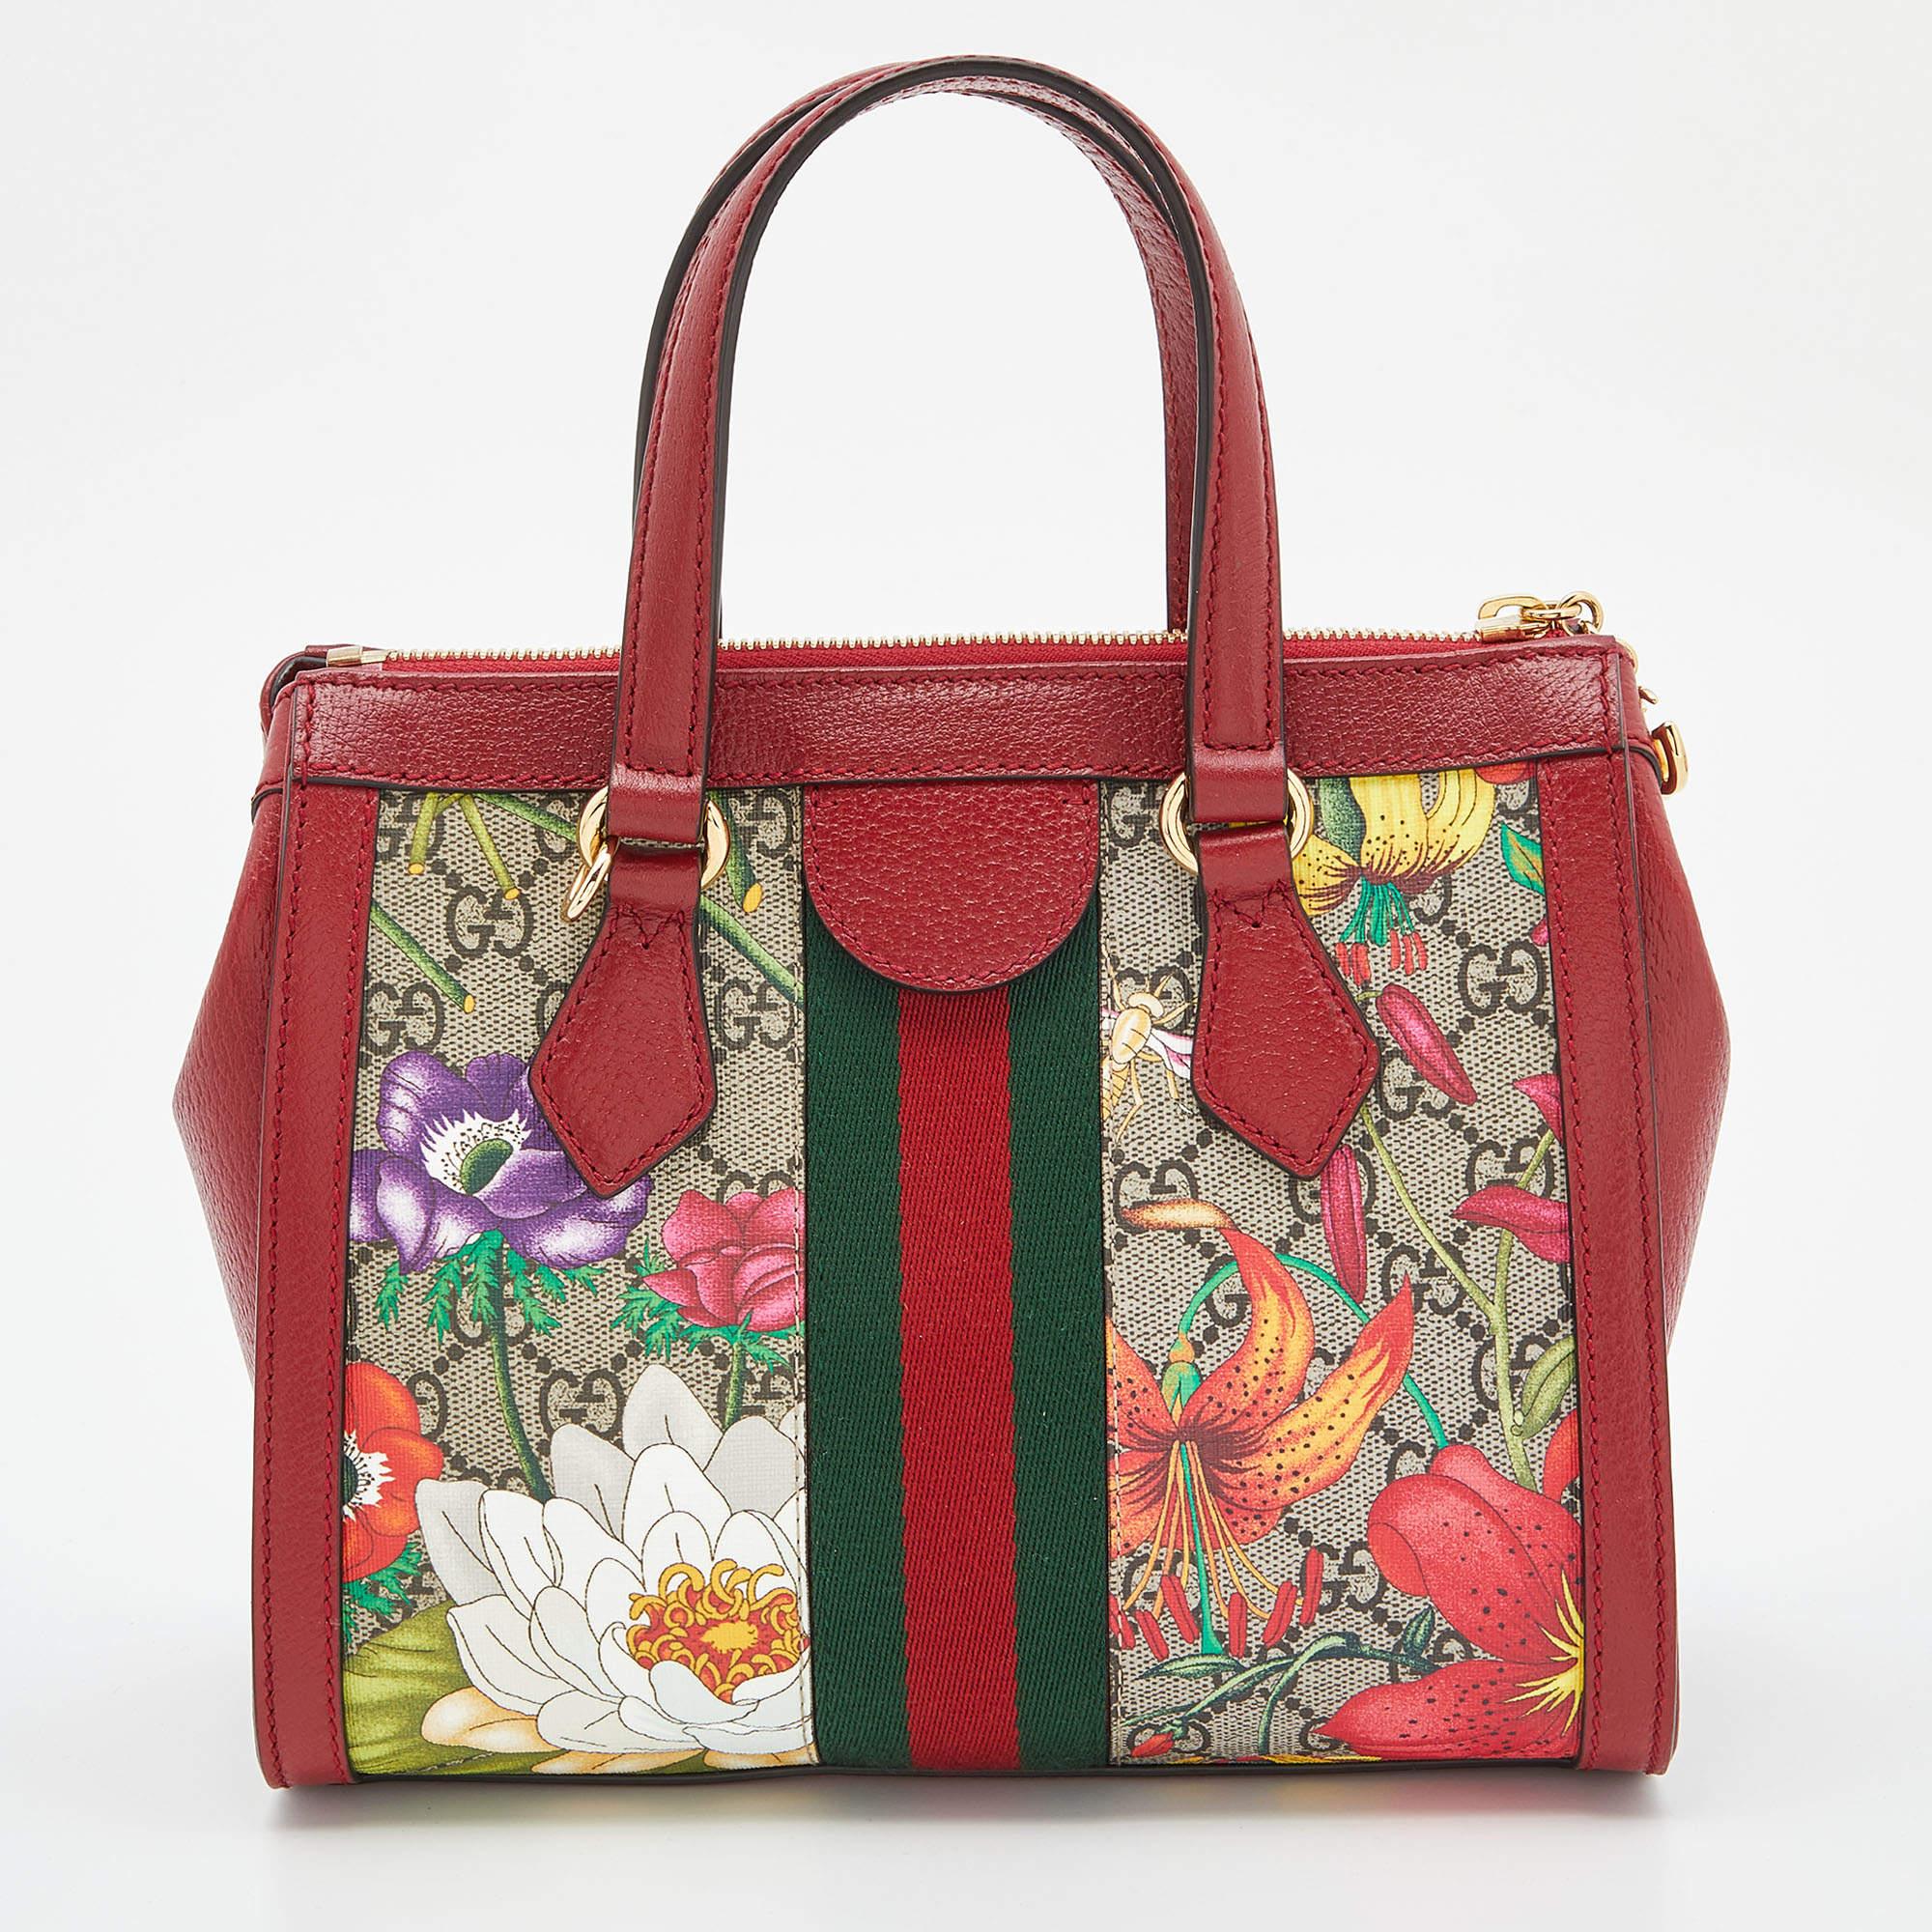 Crafted from GG Supreme canvas and leather, this Gucci Ophidia bag comes in a compact shape for a sophisticated look. It features the iconic Web stripe, Flora prints, and the GG motif—all Gucci codes. The bag suspends from two handles and a slender